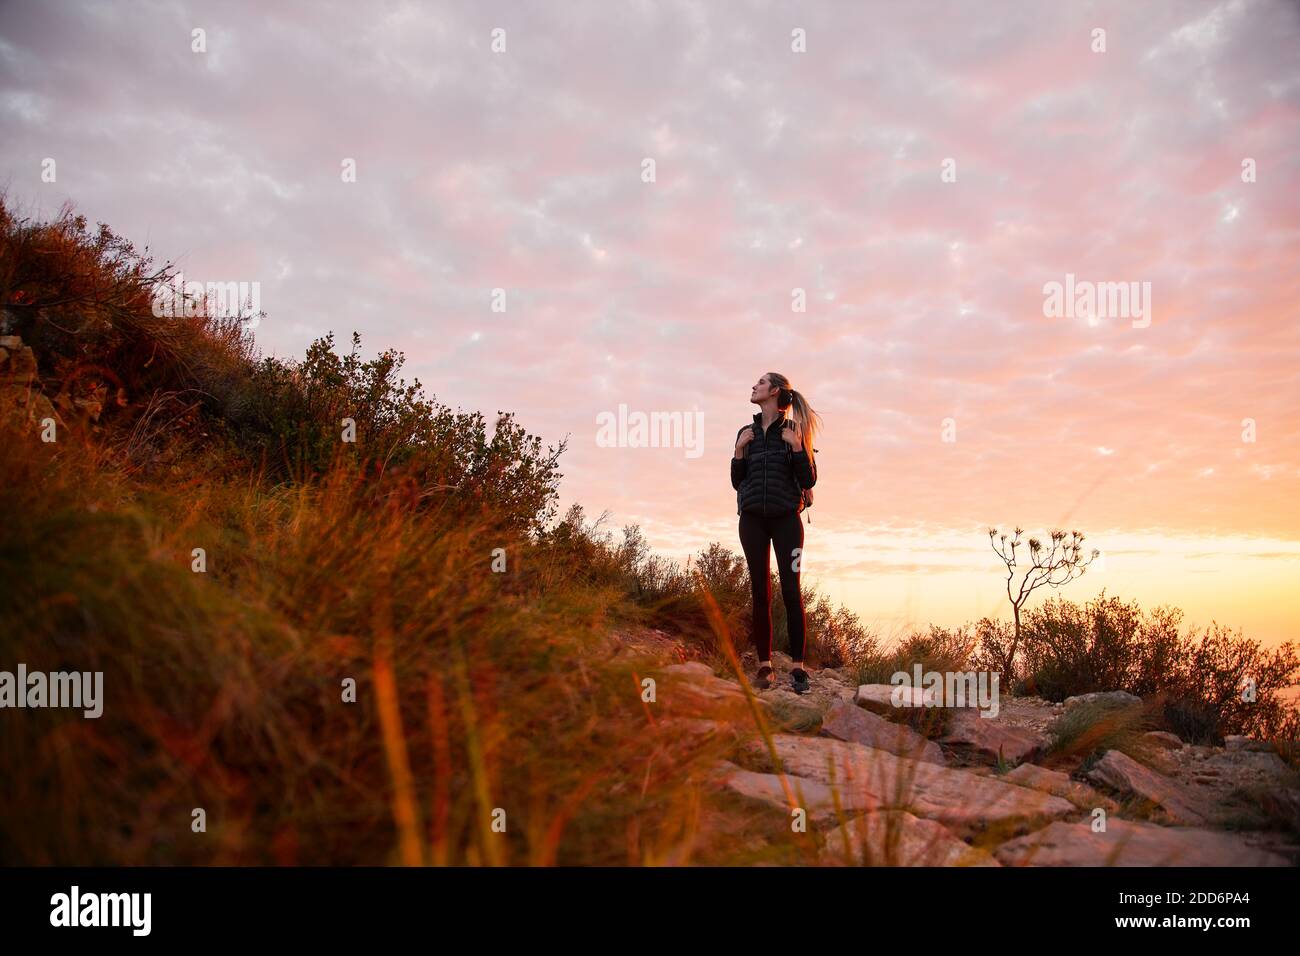 Front view of young woman on vacation wearing backpack setting off on hike climbing countryside path at sunset Stock Photo